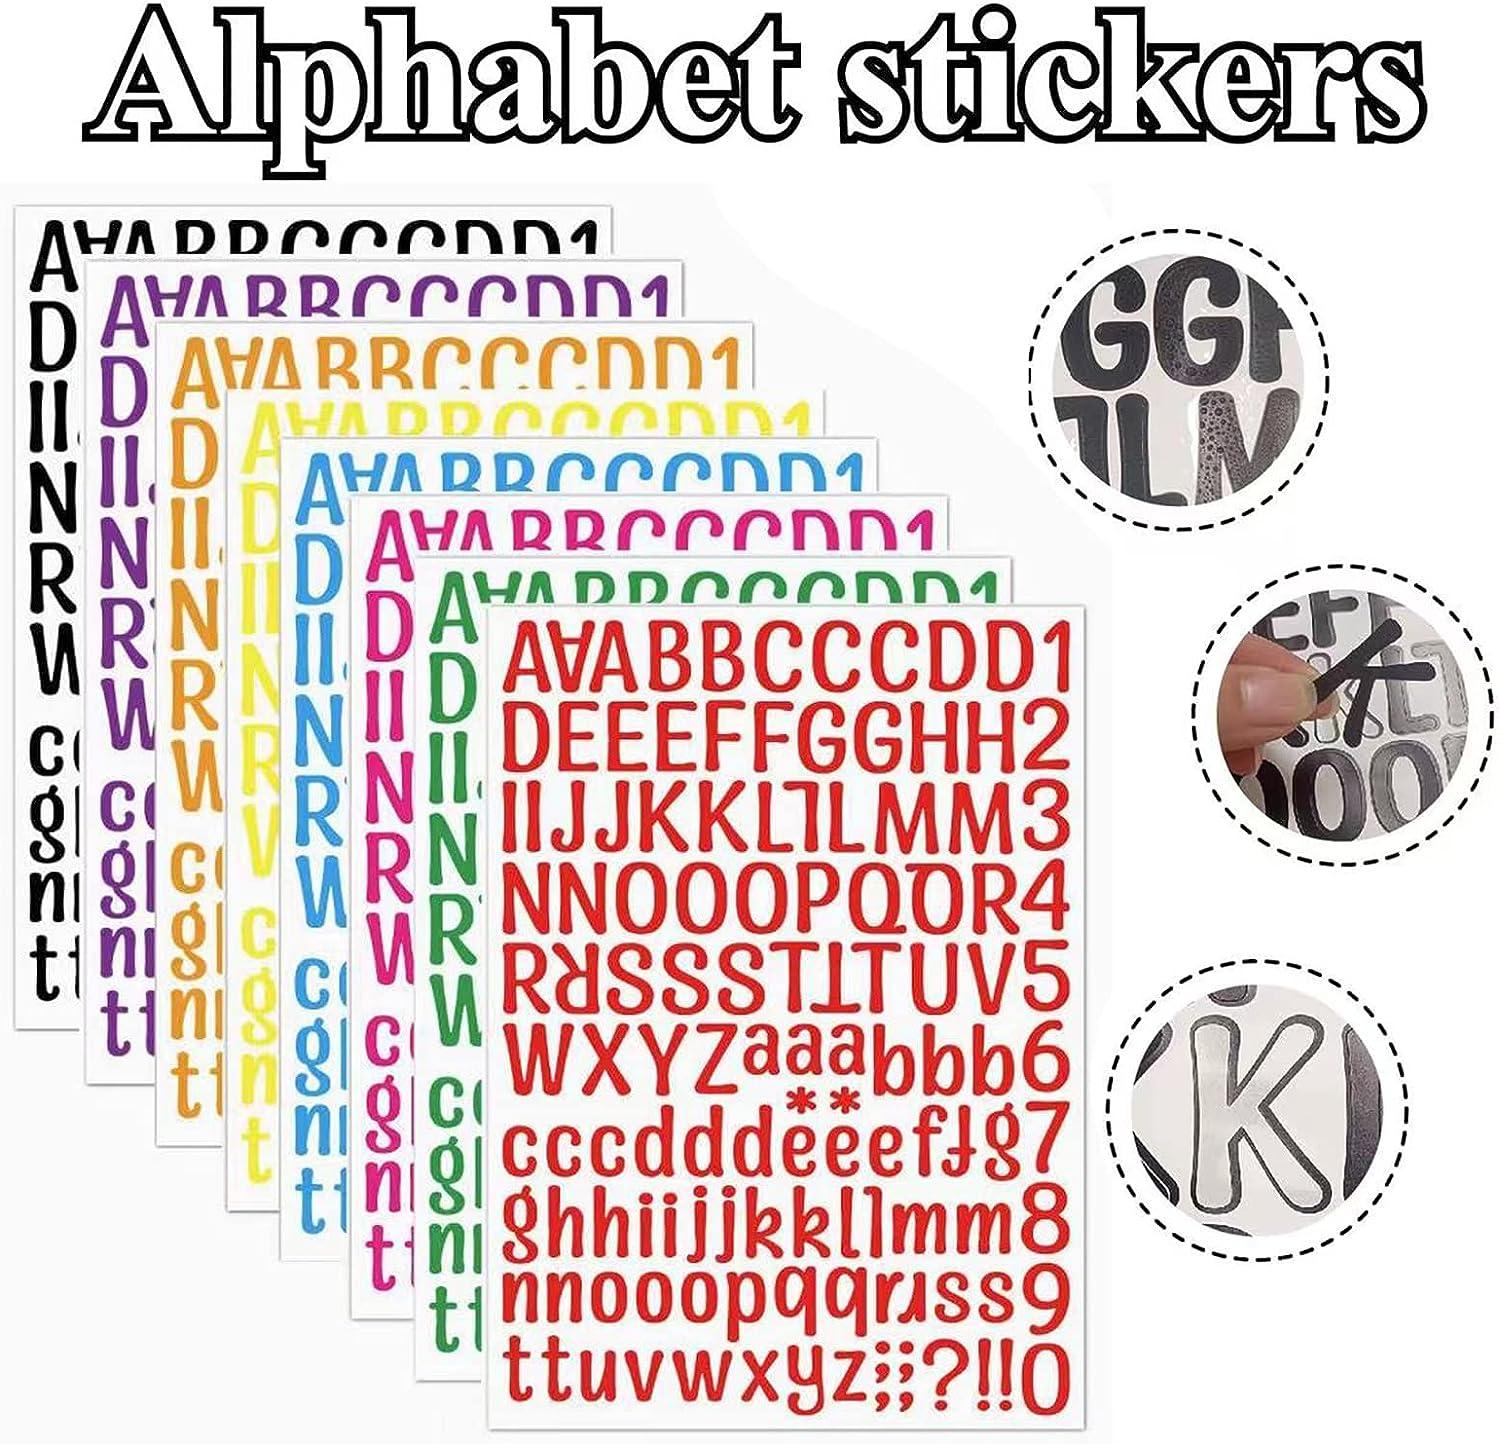 8 Sheets Letter Stickers 1008 Alphabet Stickers 1 inch Vinyl Self-Adhesive Sticker  Letters Black Alphabets ABC Stickers for DIY Mailbox House Numbers  Scrapbooking Embellishments & Decorations A4 Sticker